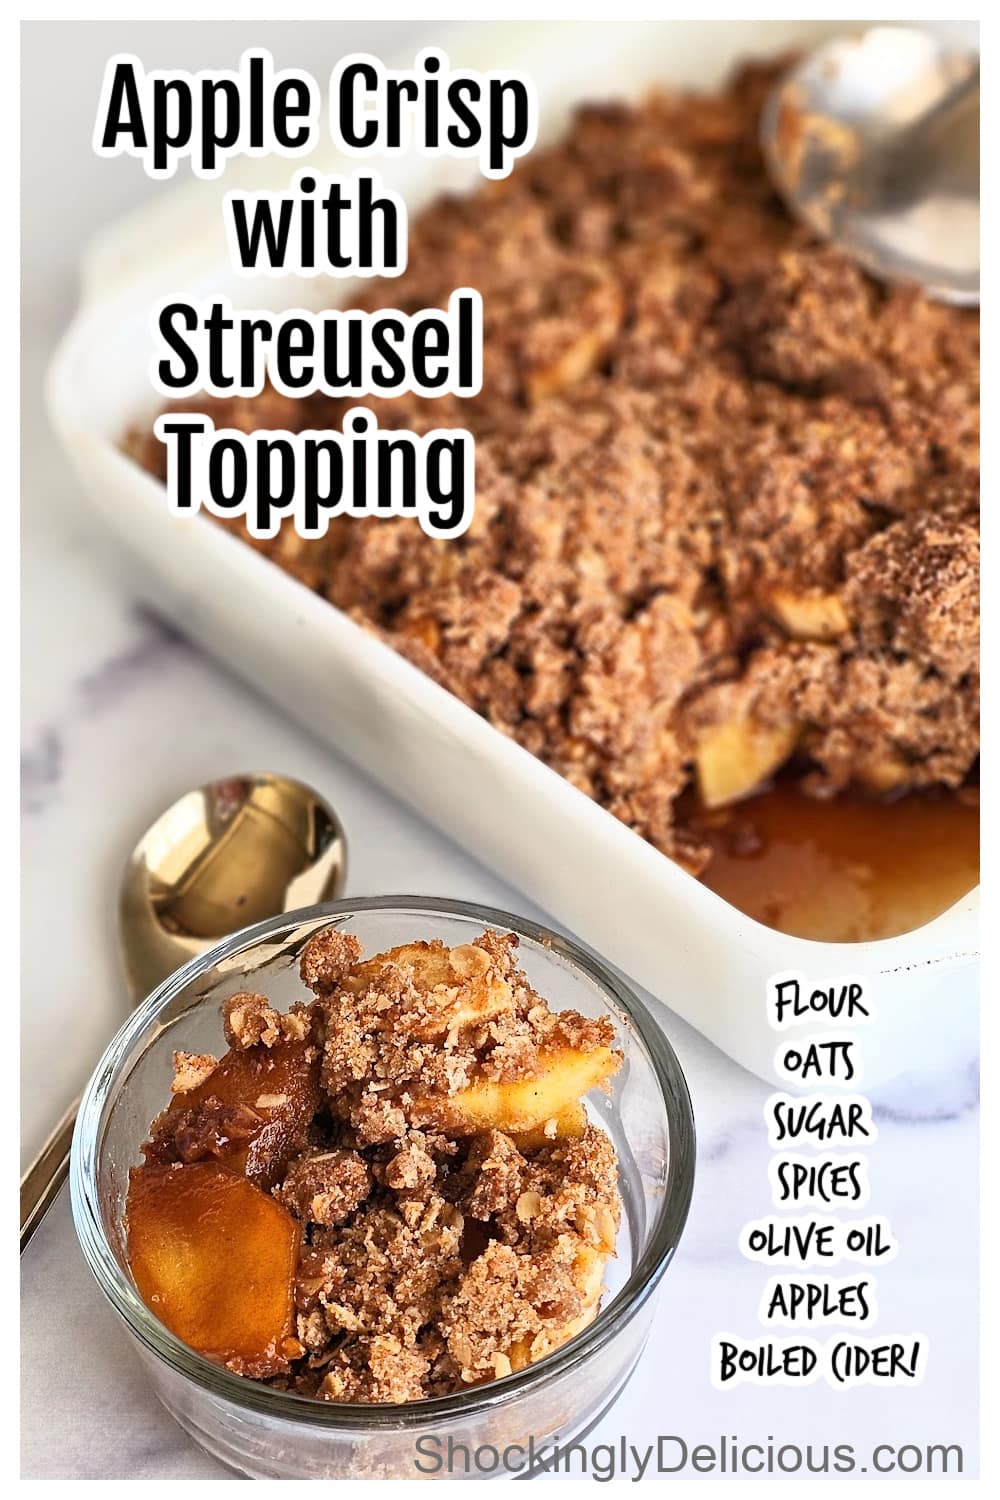 Apple Crisp with Streusel Topping Pinterest Pin